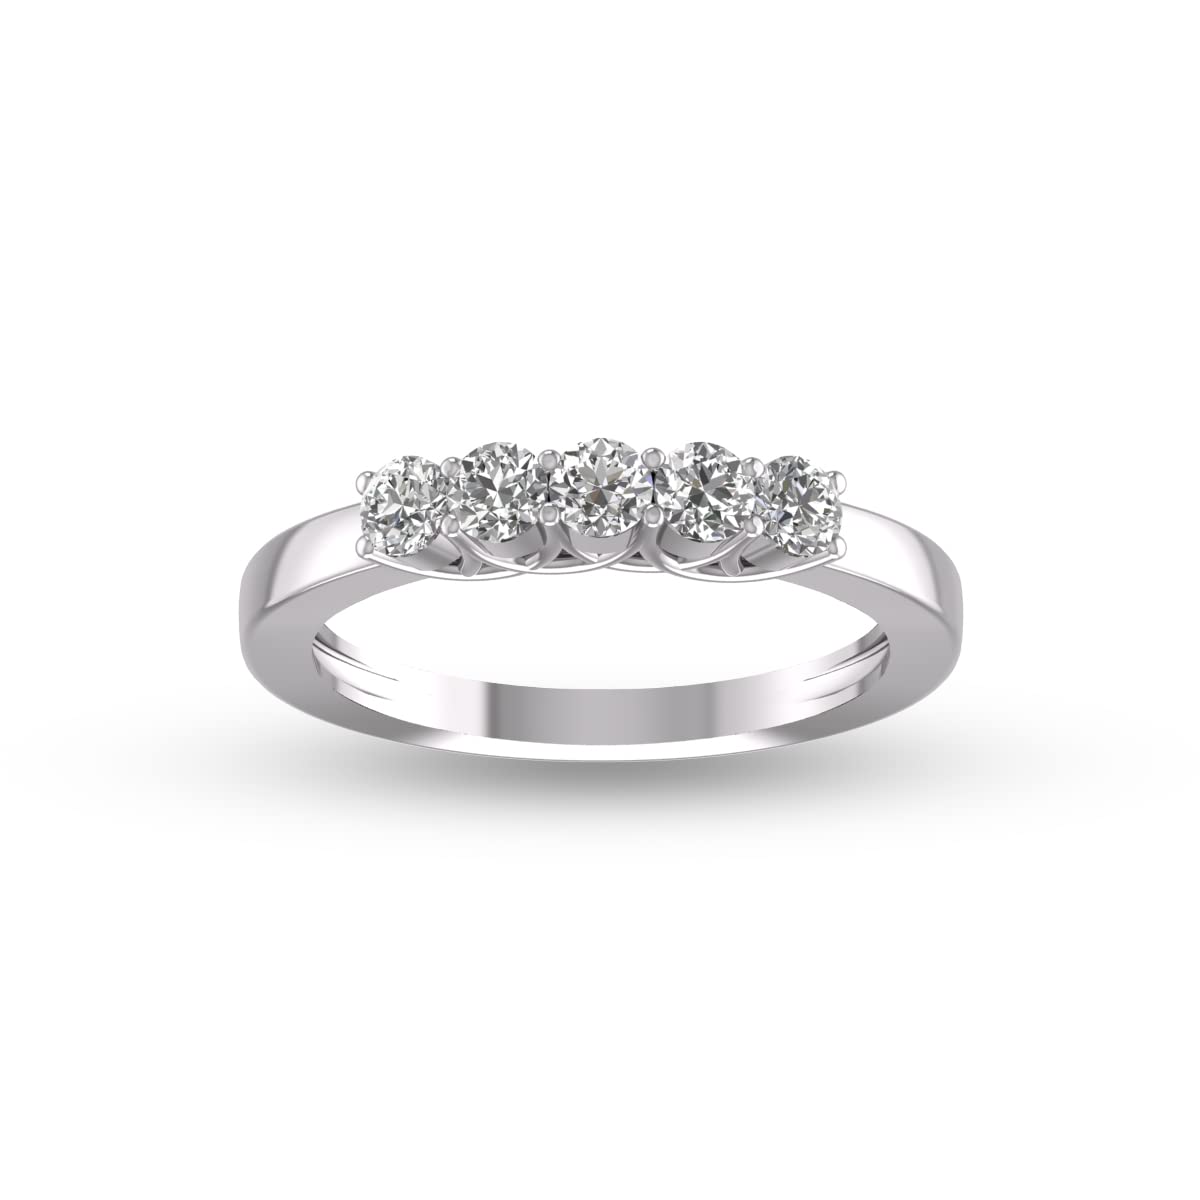 1 Carat TW Five Stone Natural Round Diamond Wedding Anniversary Band In 14k White Gold (J-K Color I2-I3 Clarity)